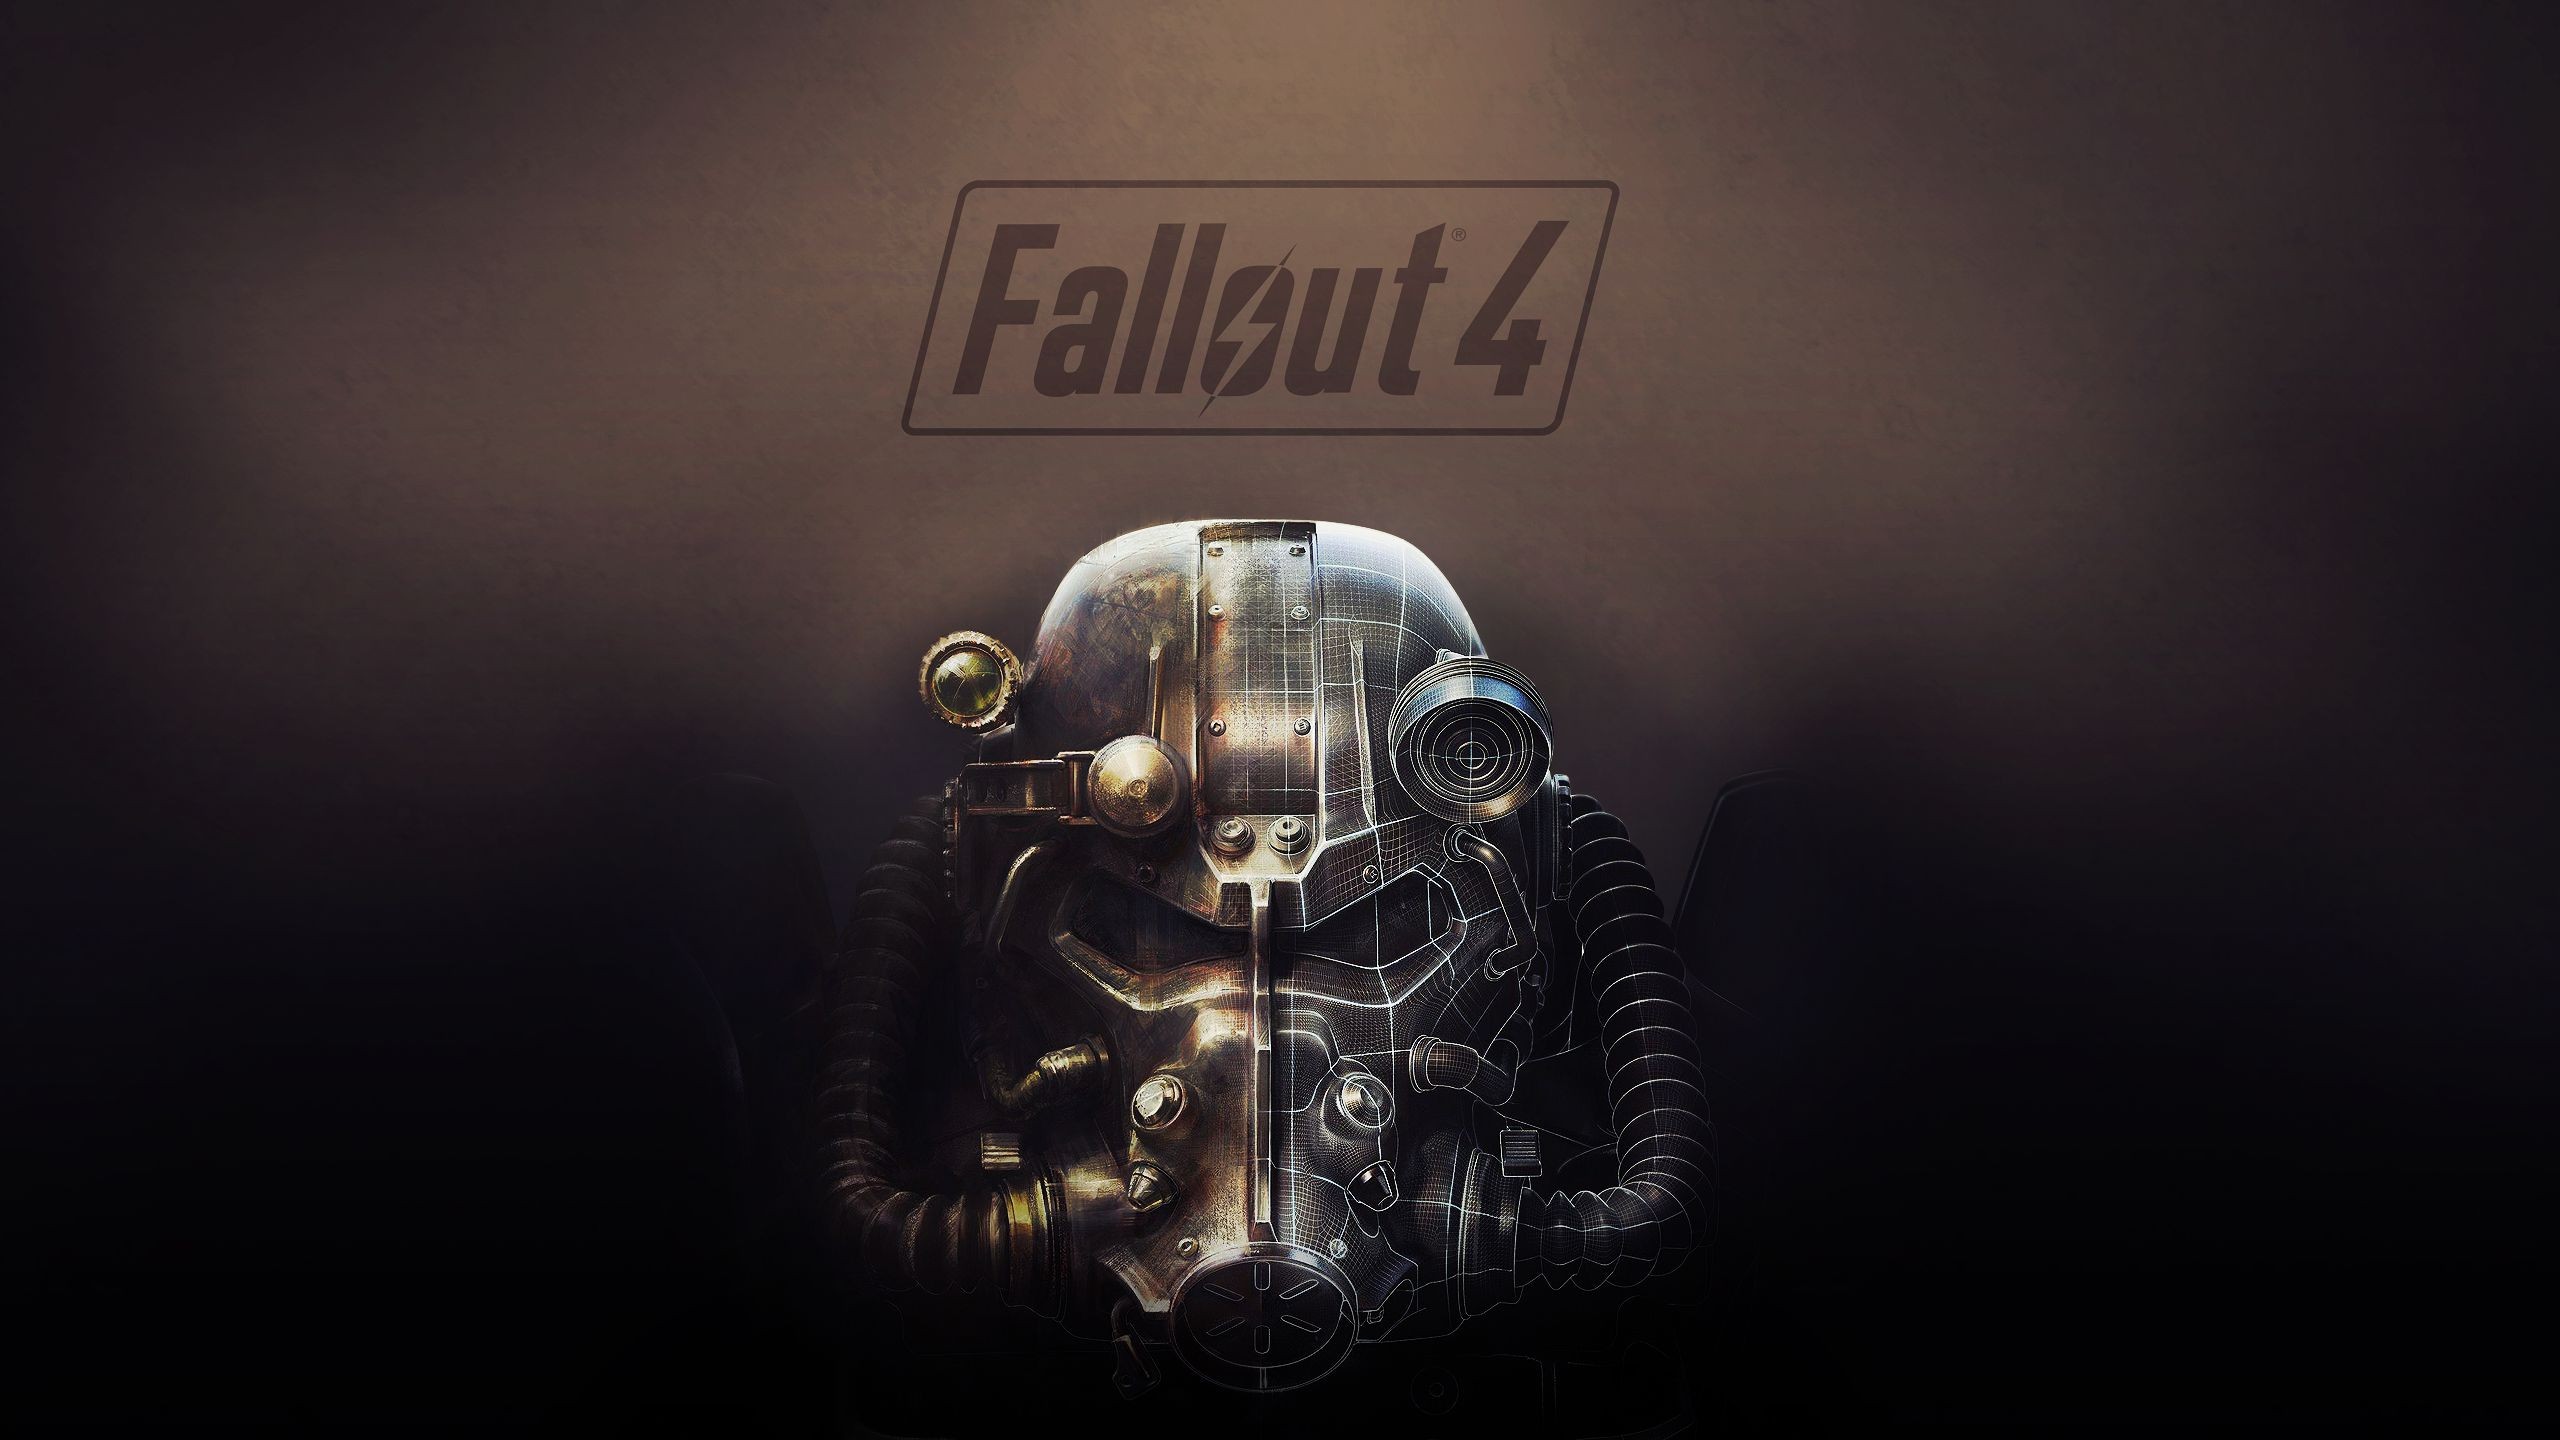 General 2560x1440 Fallout 4 Fallout video games PC gaming video game art